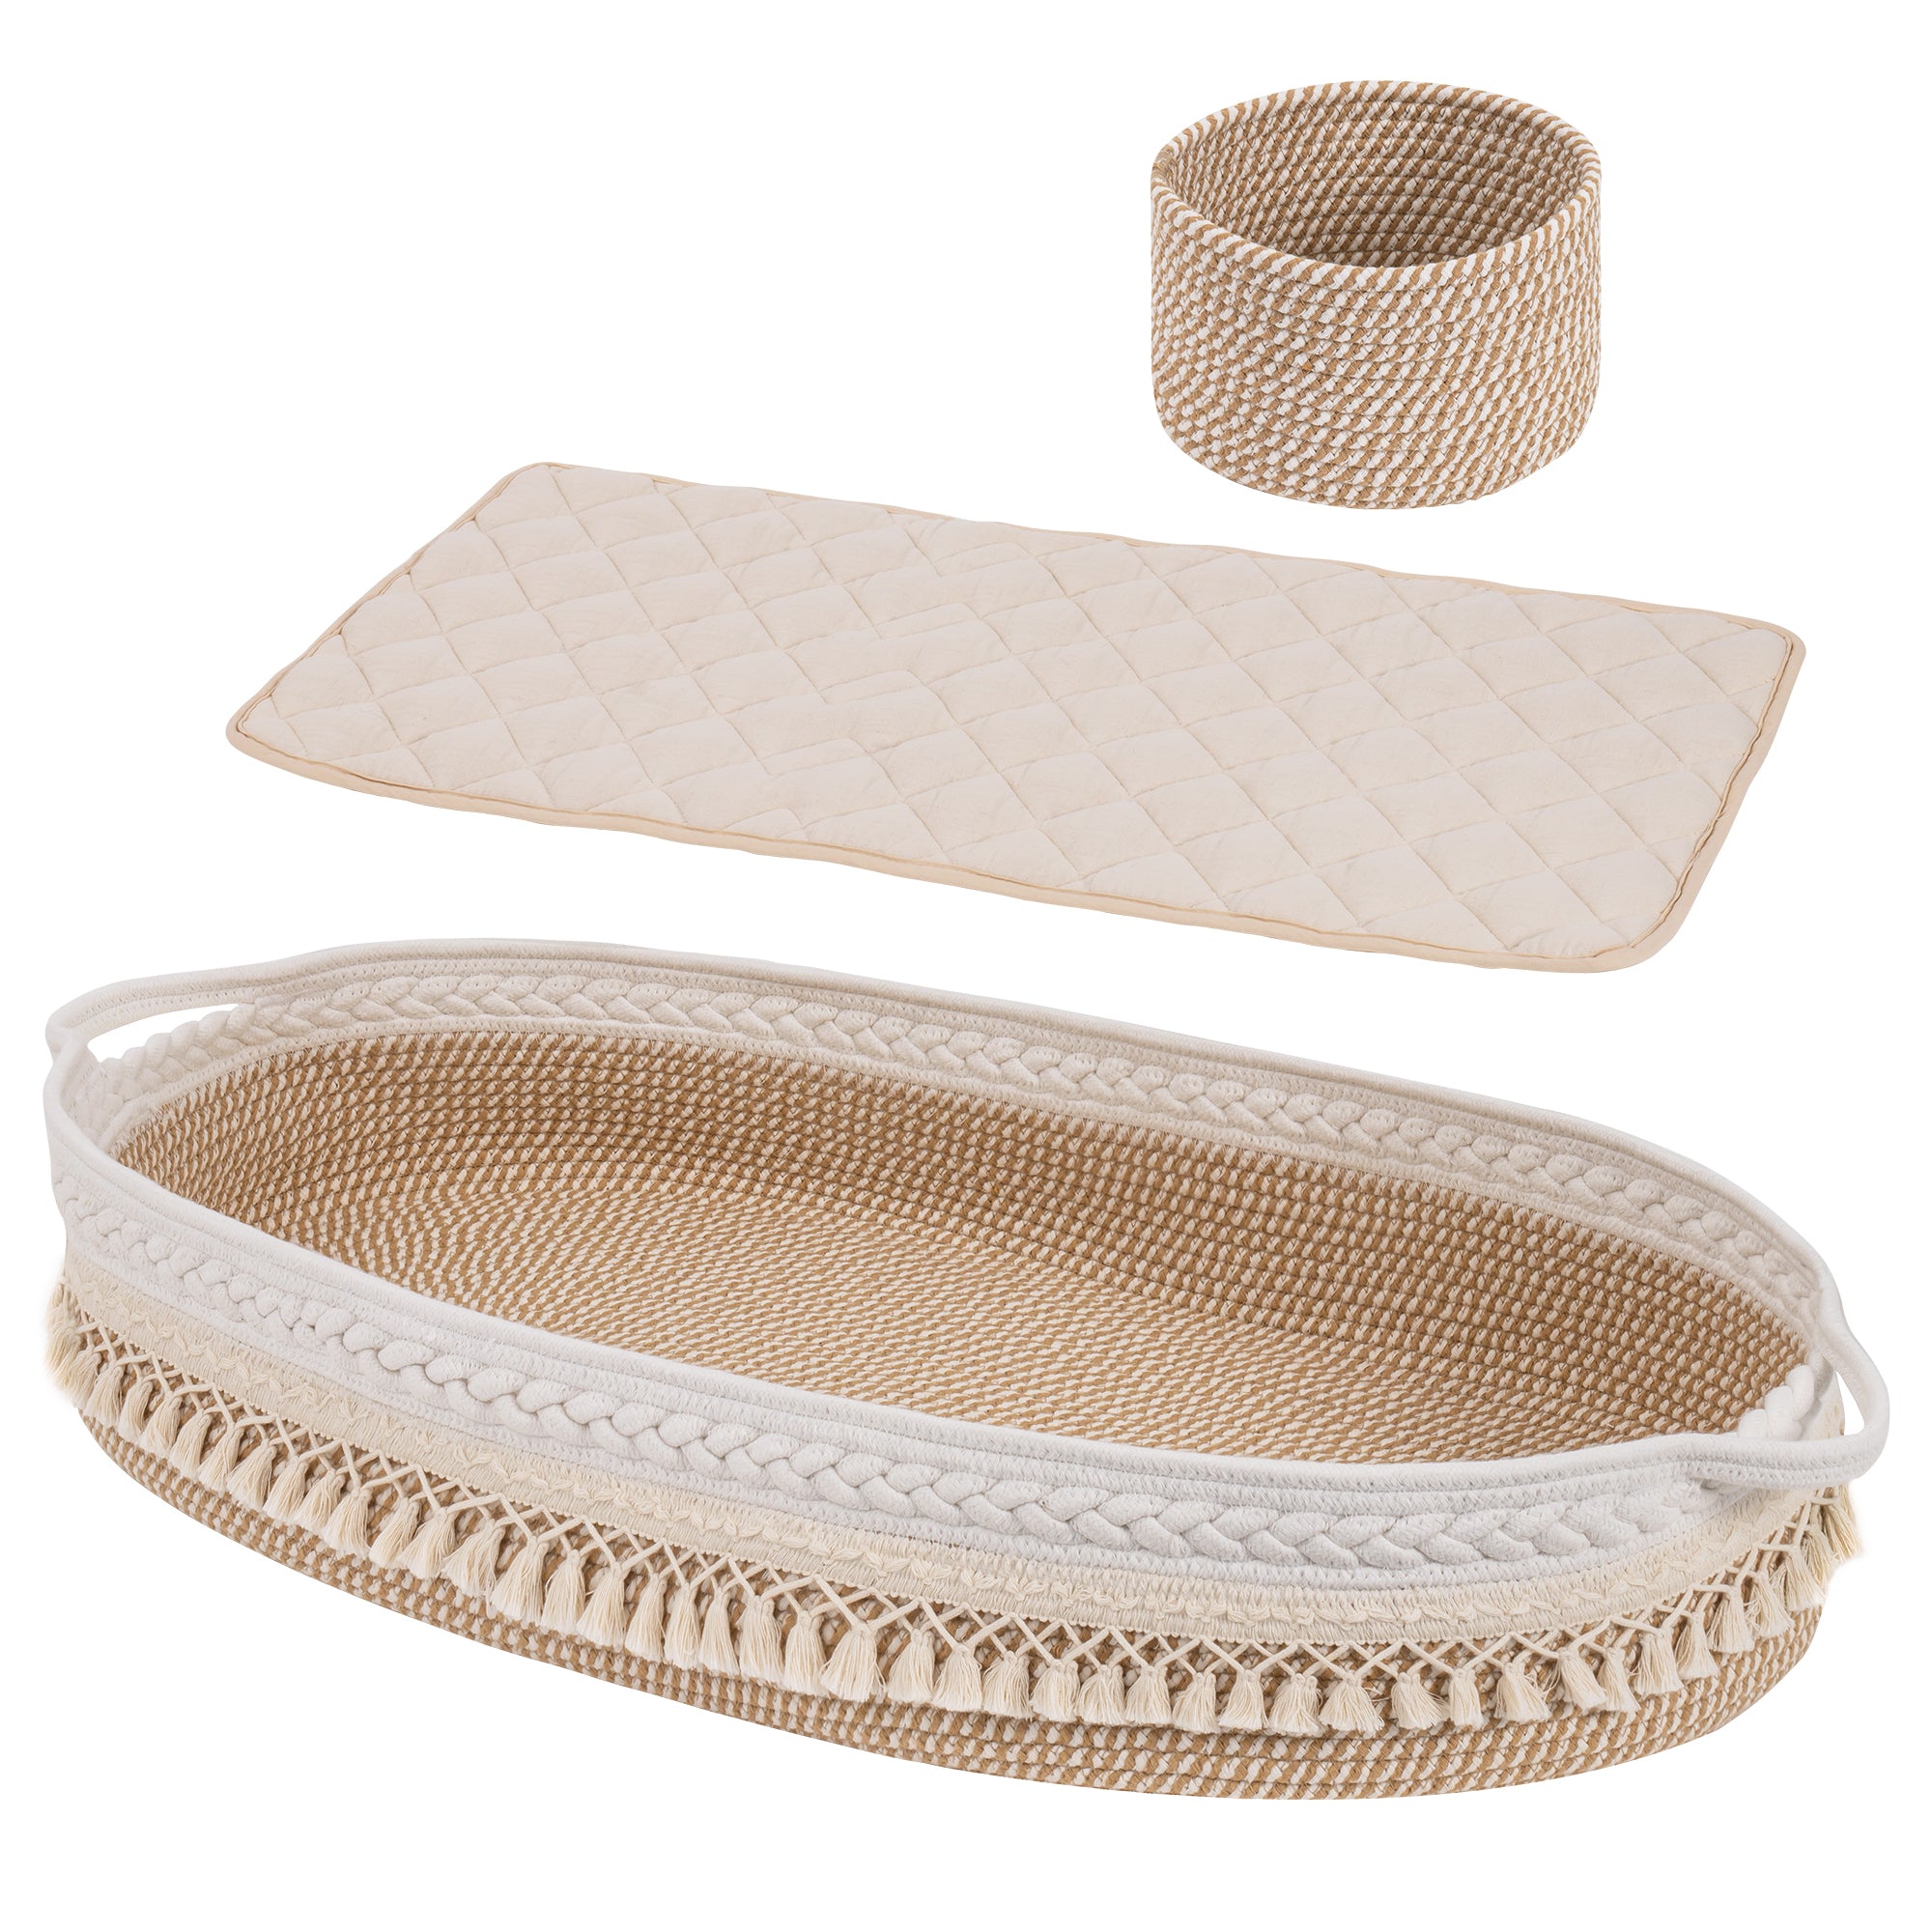 Baby Changing Handmade Woven Cotton Rope Moses Basket - Beige & Brown